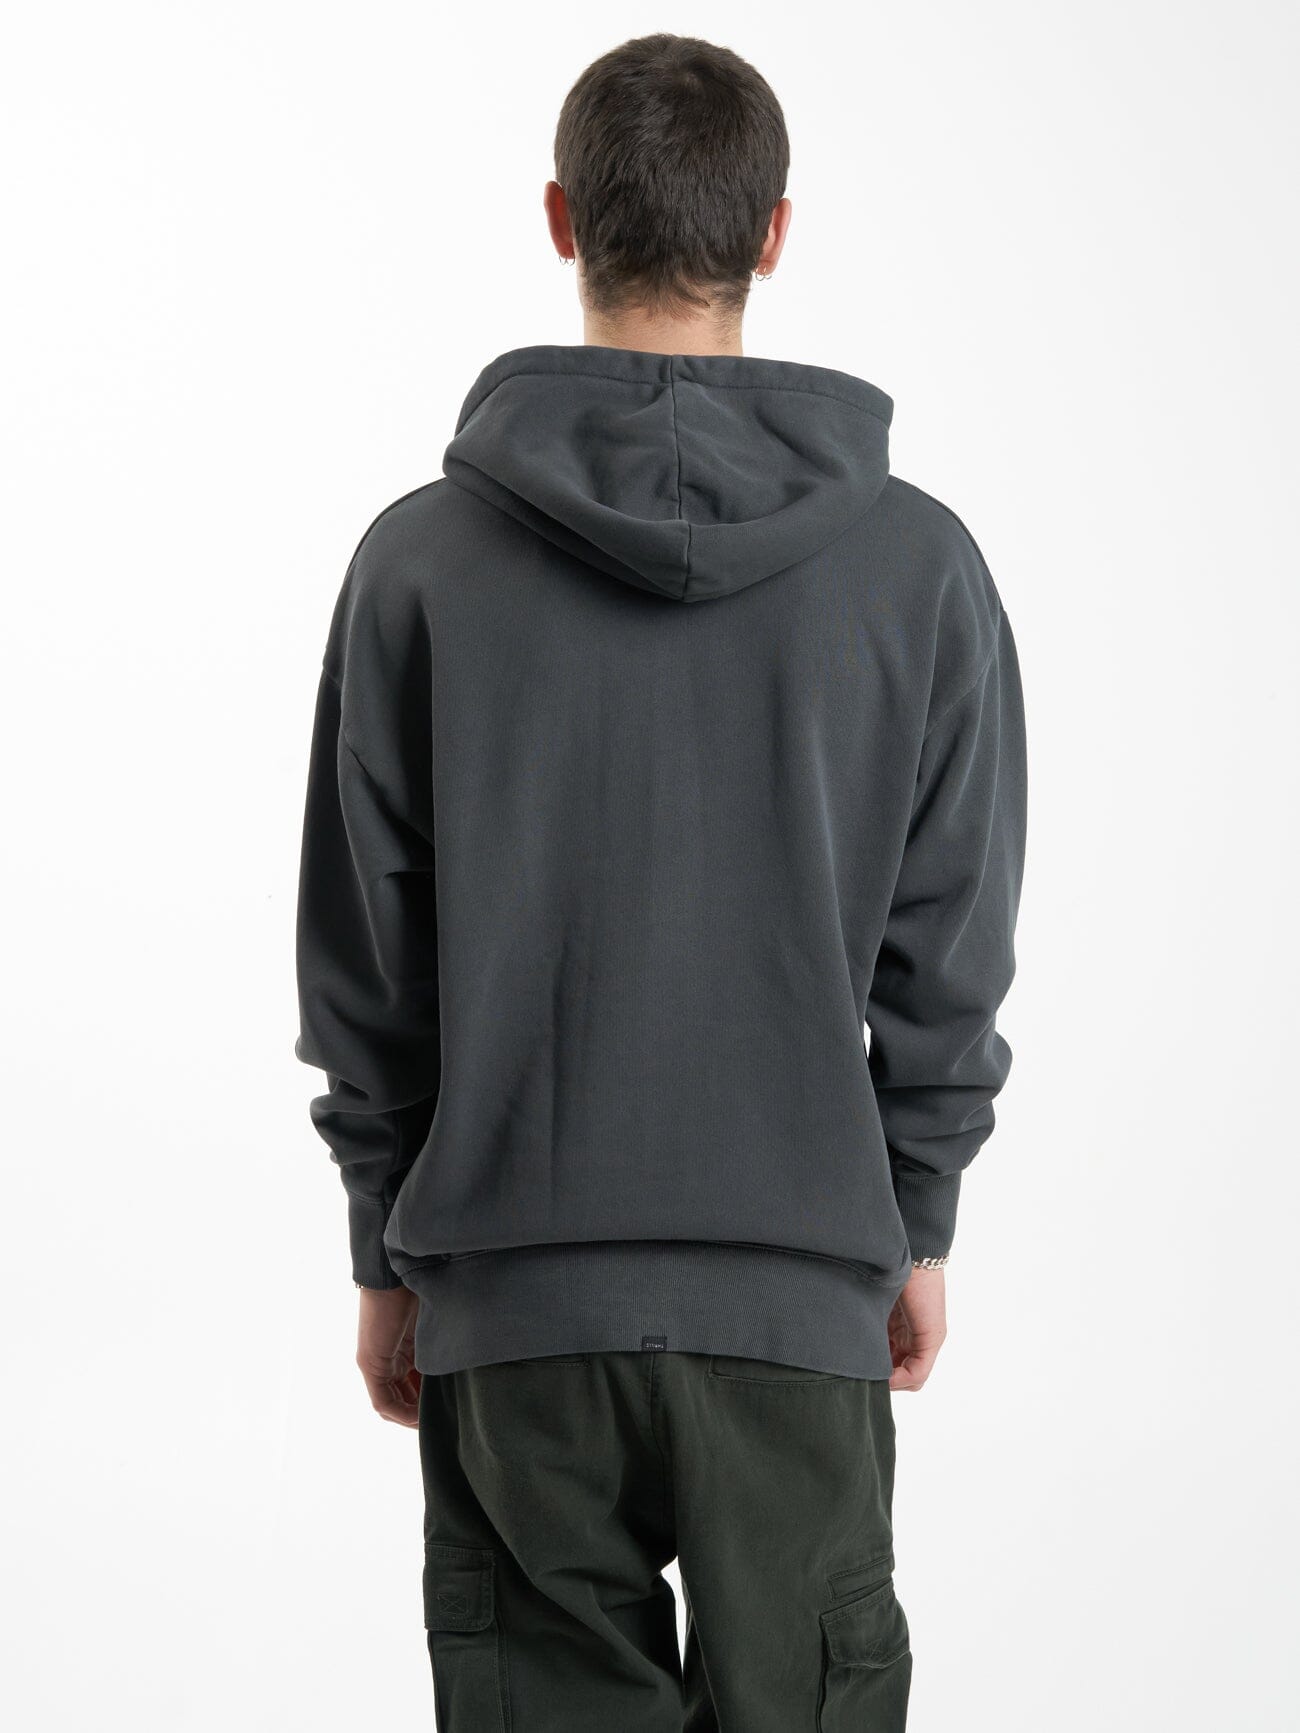 Stand Firm Slouch Pull On Hood - Merch Black